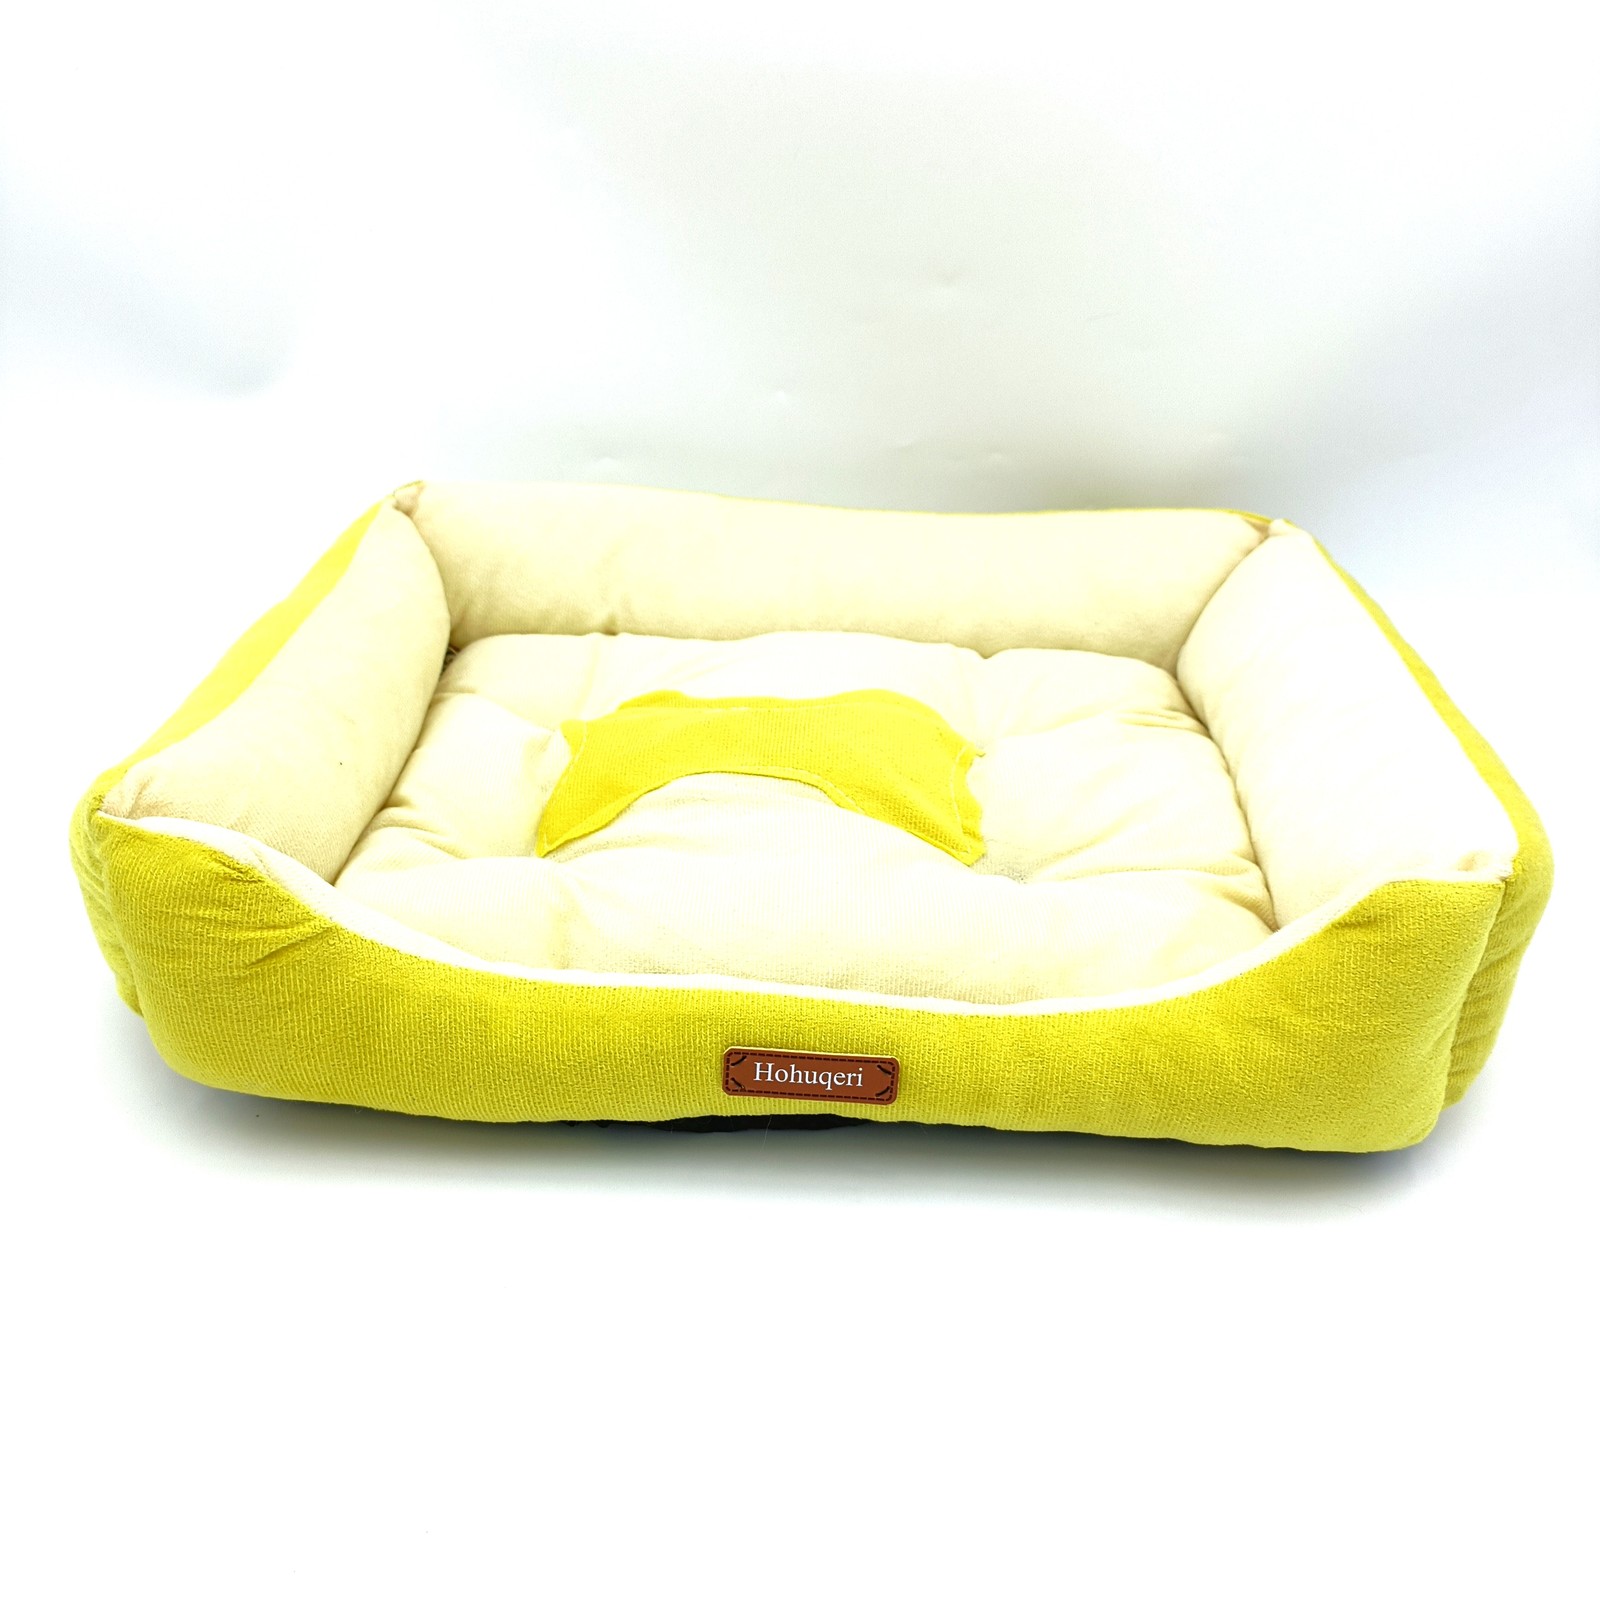 Primary image for Hohuqeri Pet furniture Soft and Comfortable Waterproof Non-Slip Dog Bed, Yeollw